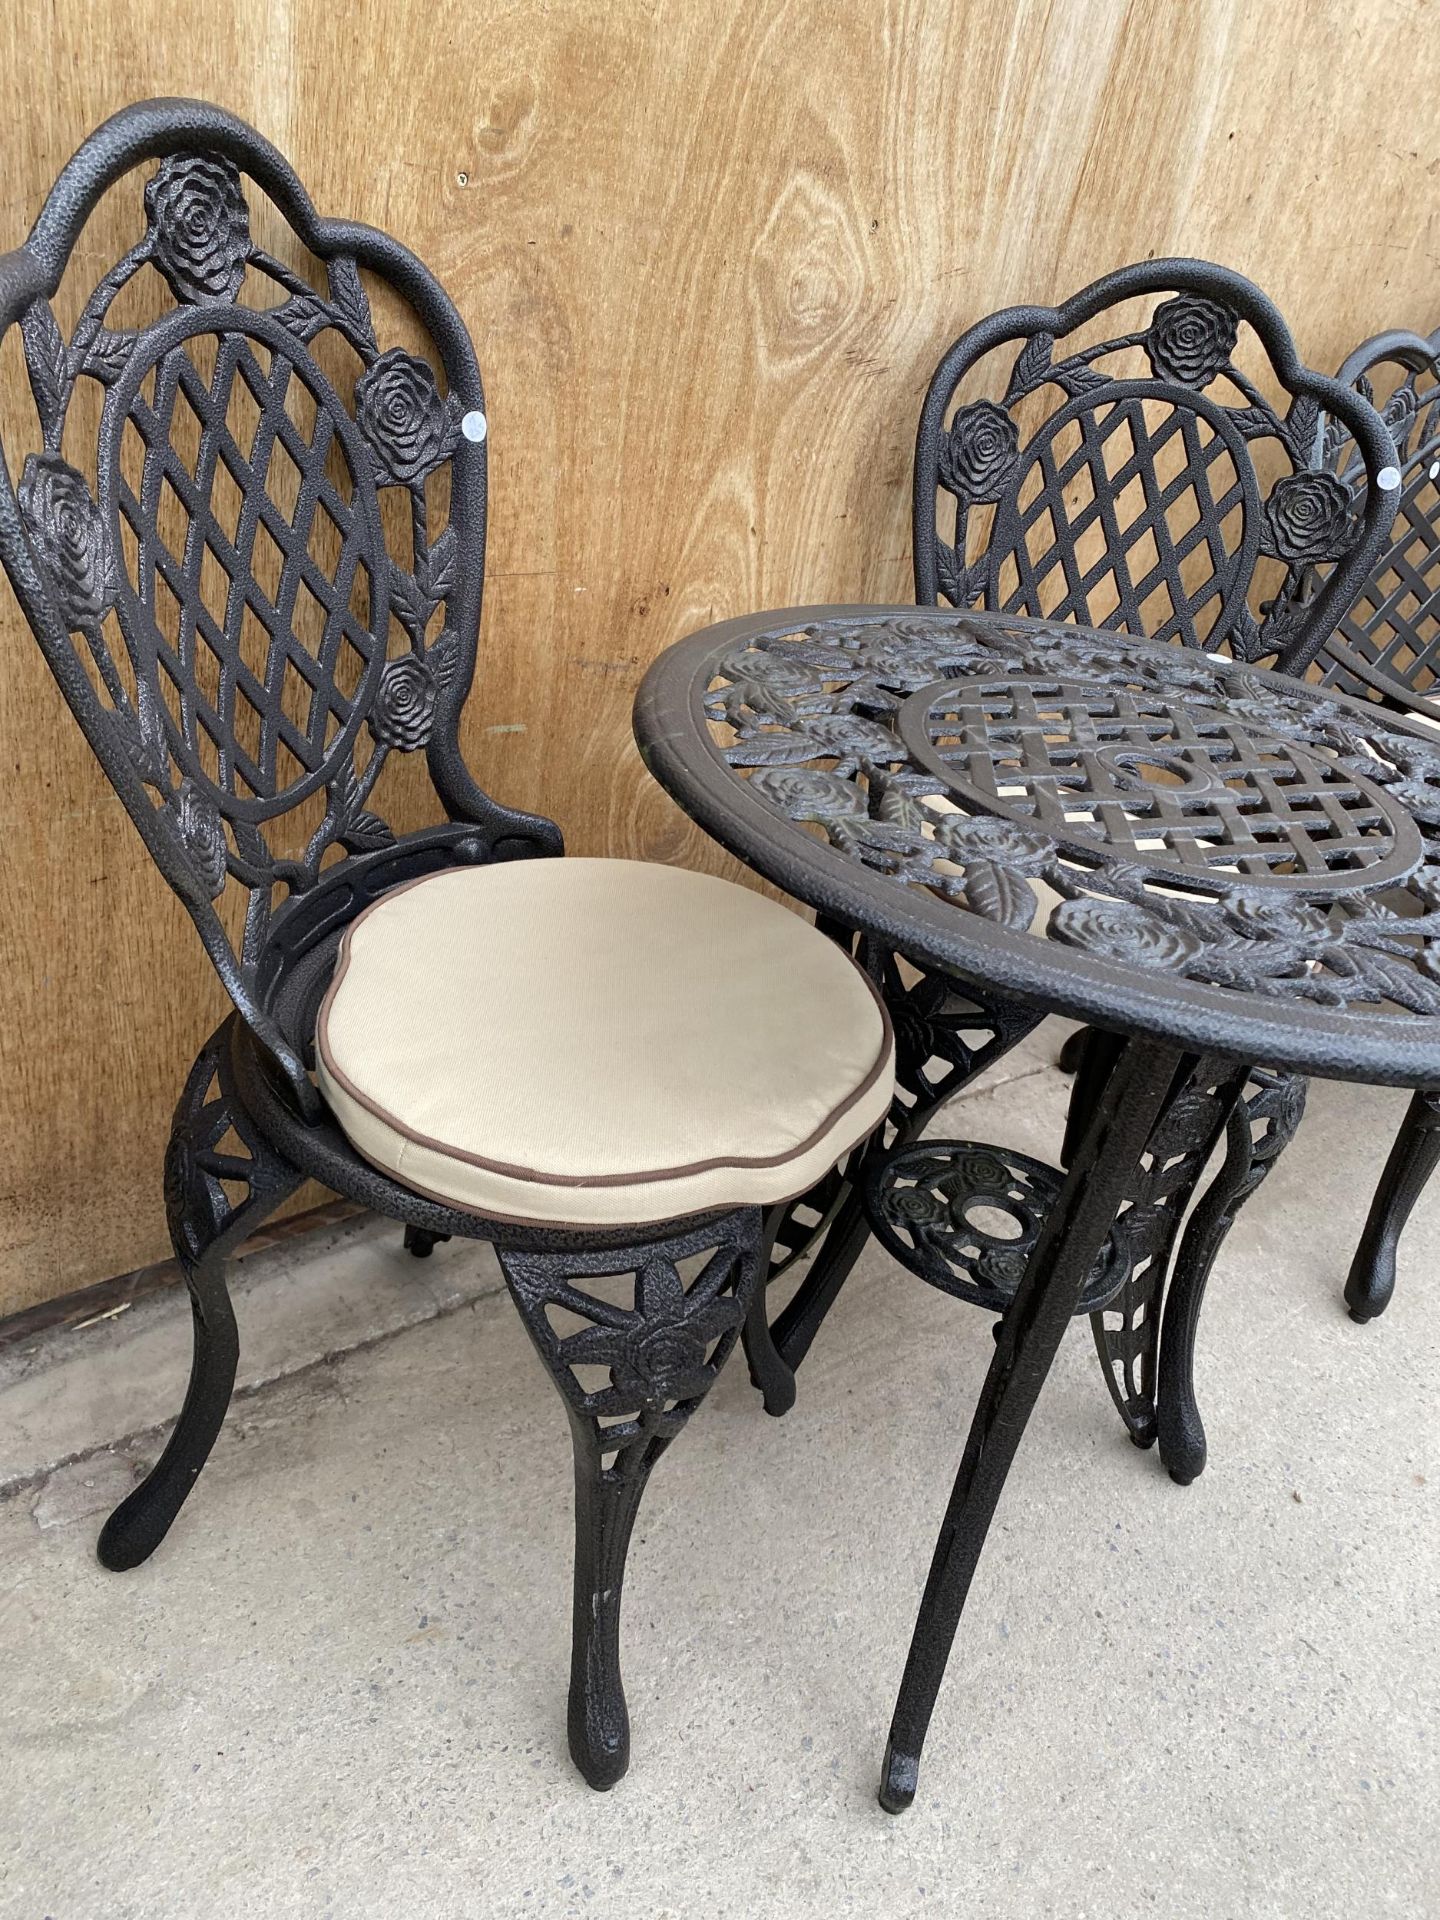 A CAST ALLOY BISTRO SET COMPRISING OF A ROUND FLORAL TABLE AND TWO CHAIRS WITH CUSHIONS - Image 2 of 3